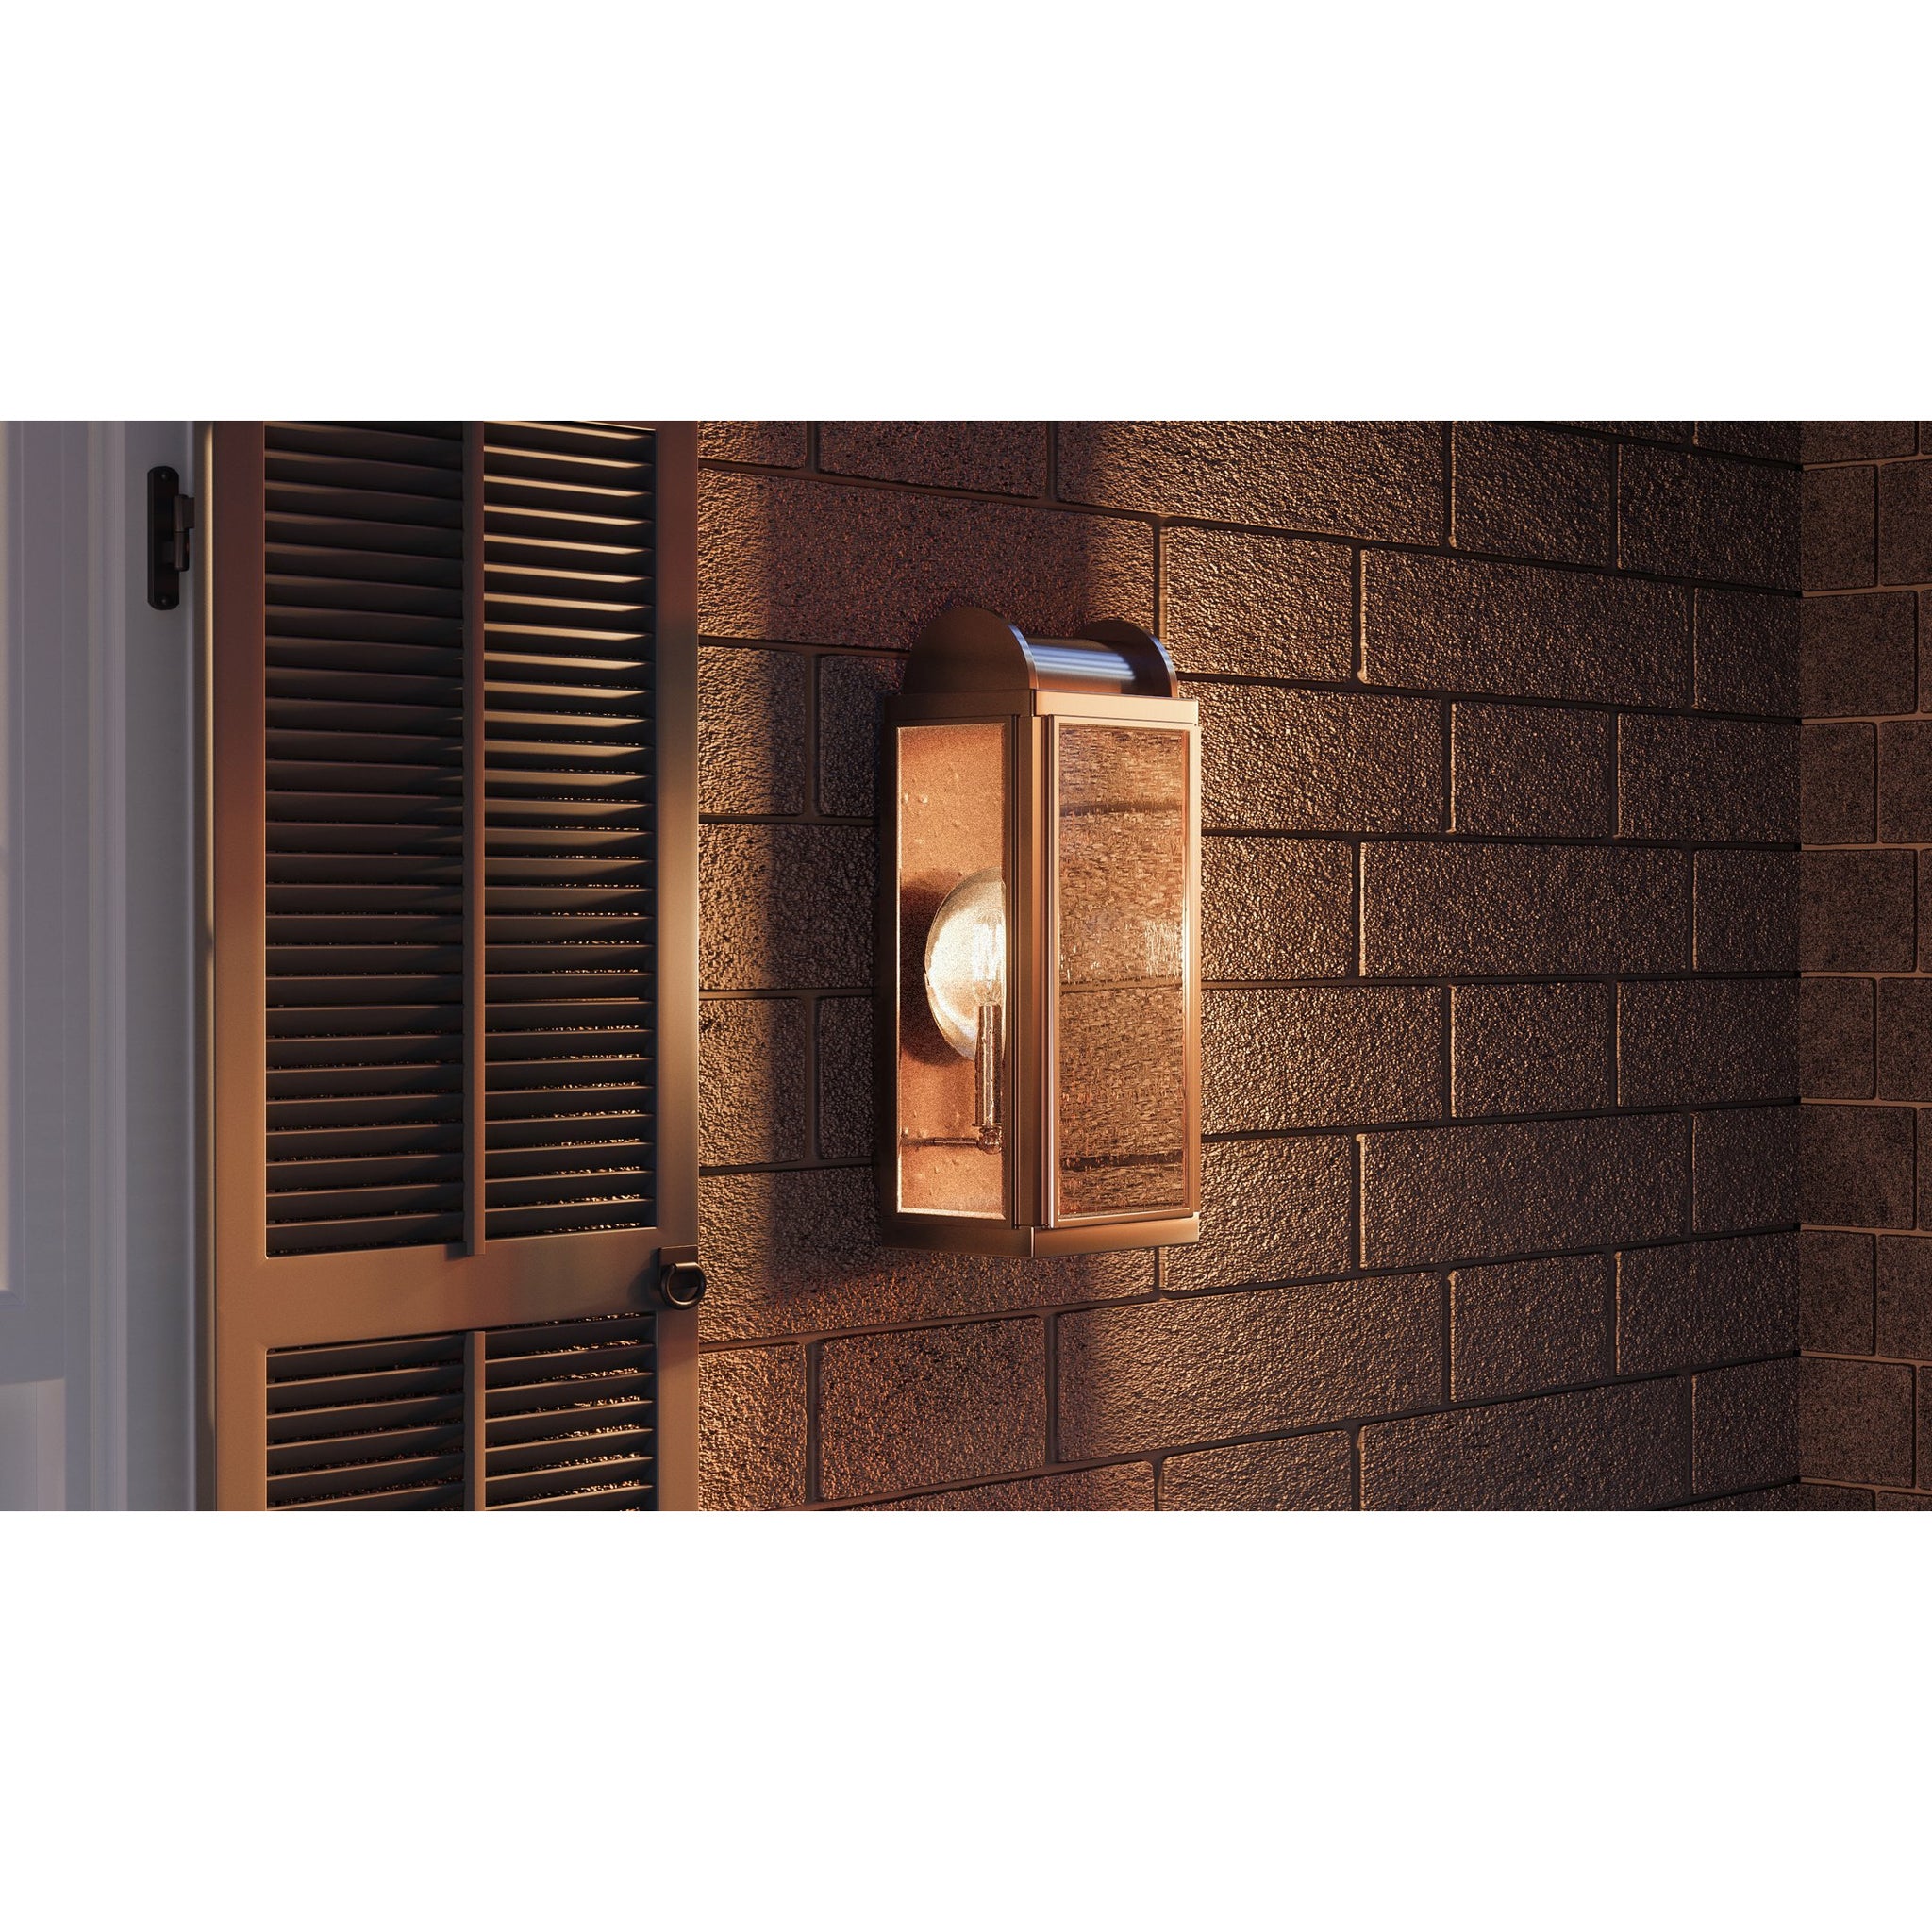 Danville Outdoor Wall Light Aged Copper